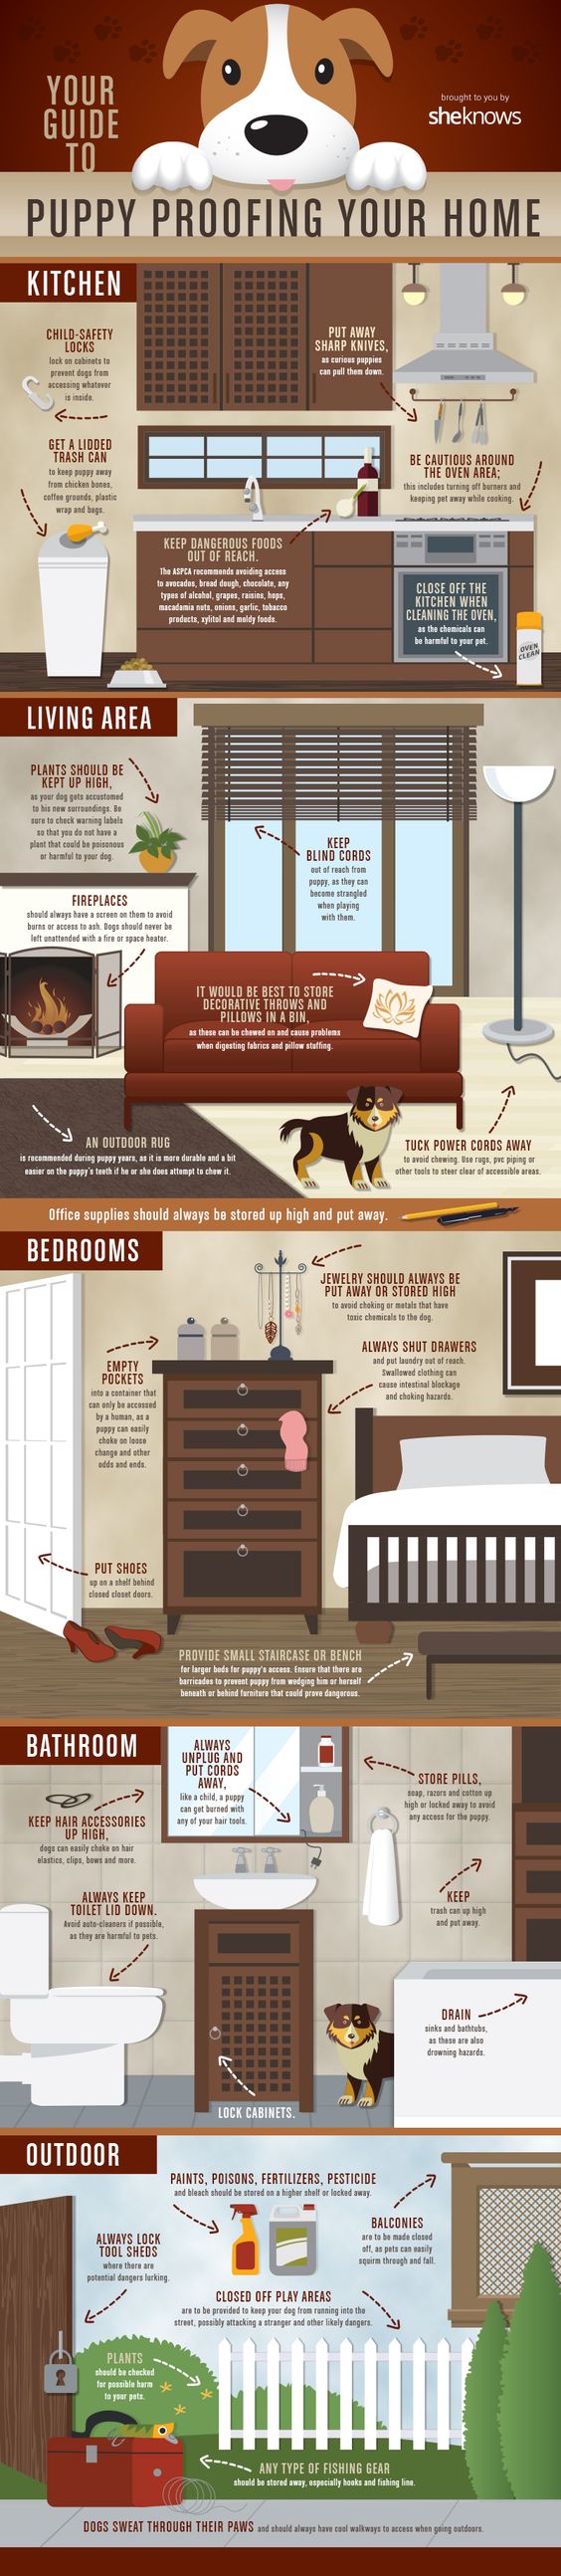 A list of everything you need to cover and move to make your home puppy-proof